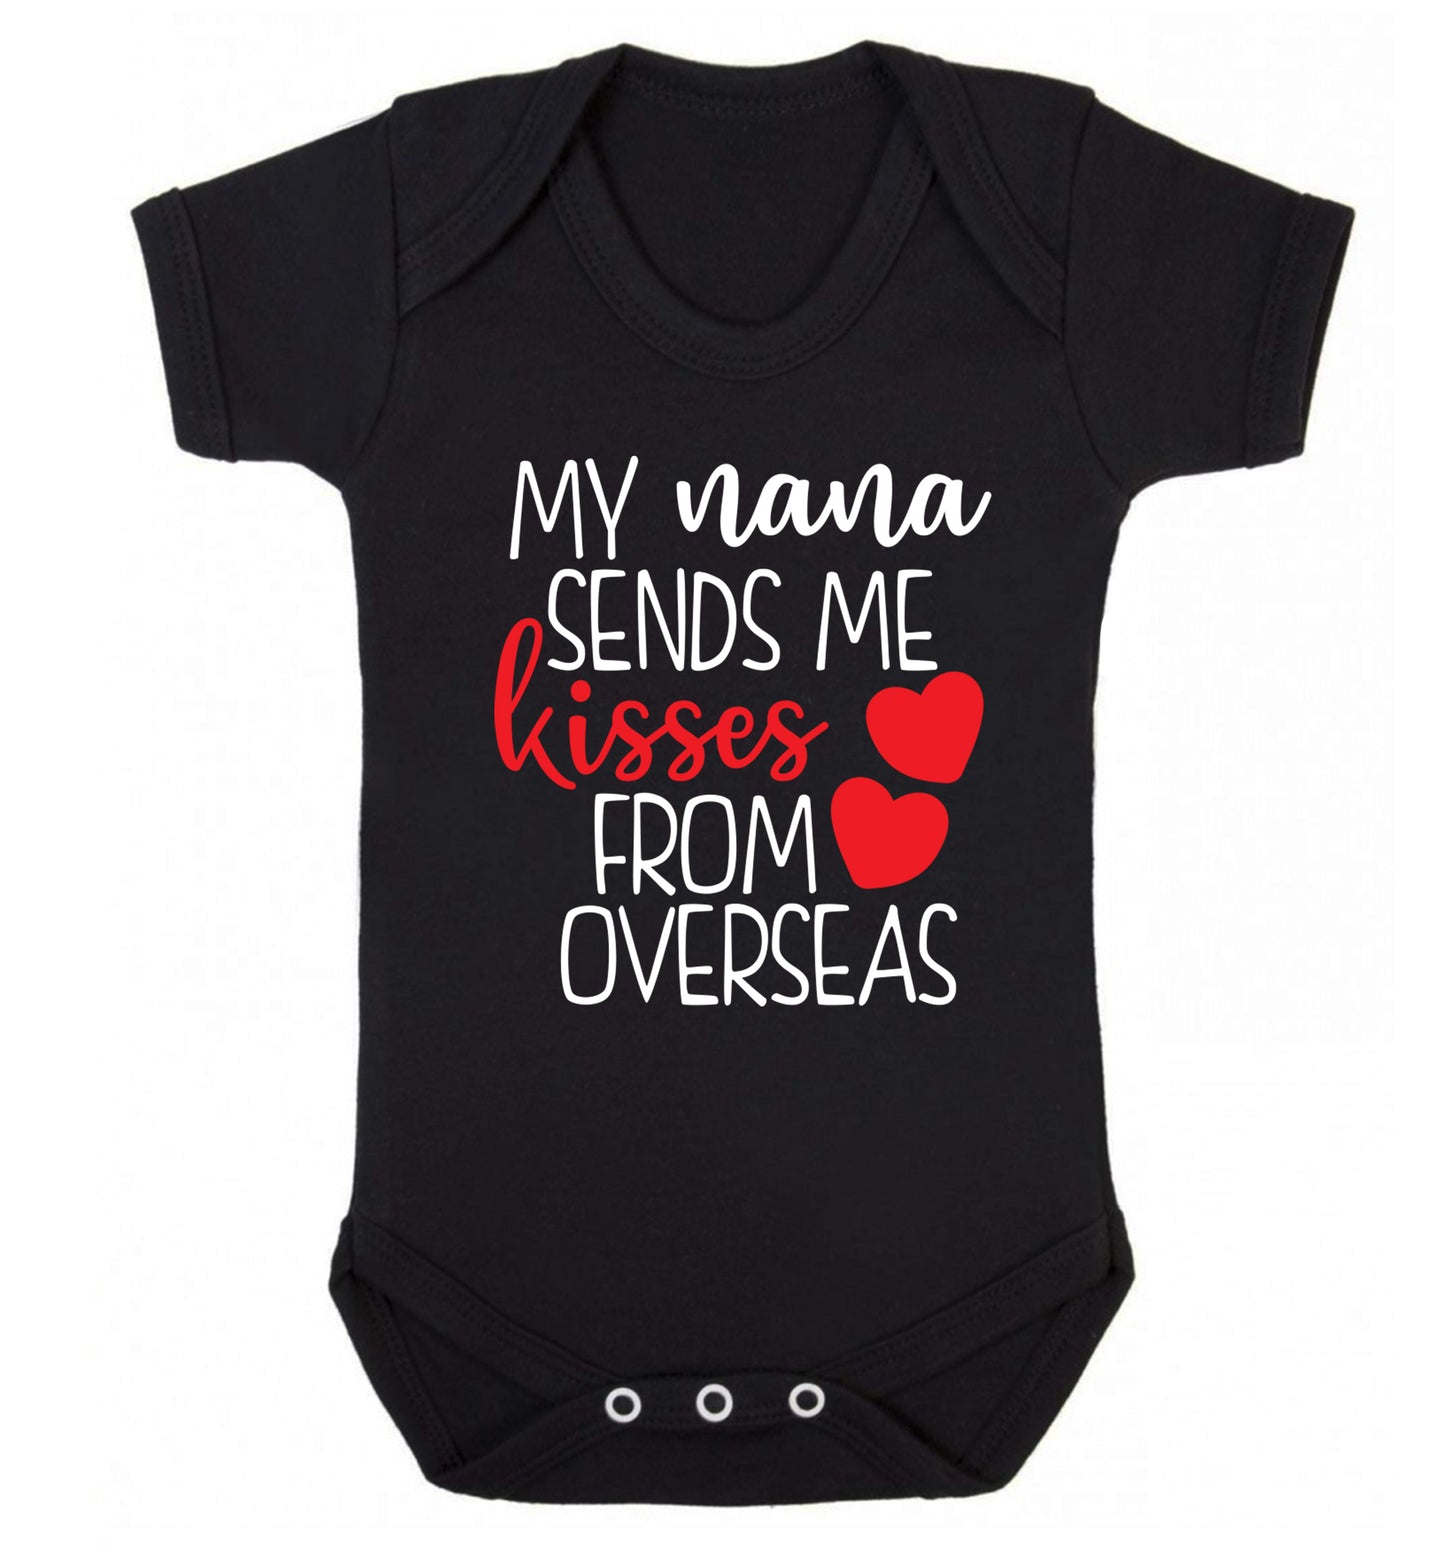 My nana sends me kisses from overseas Baby Vest black 18-24 months